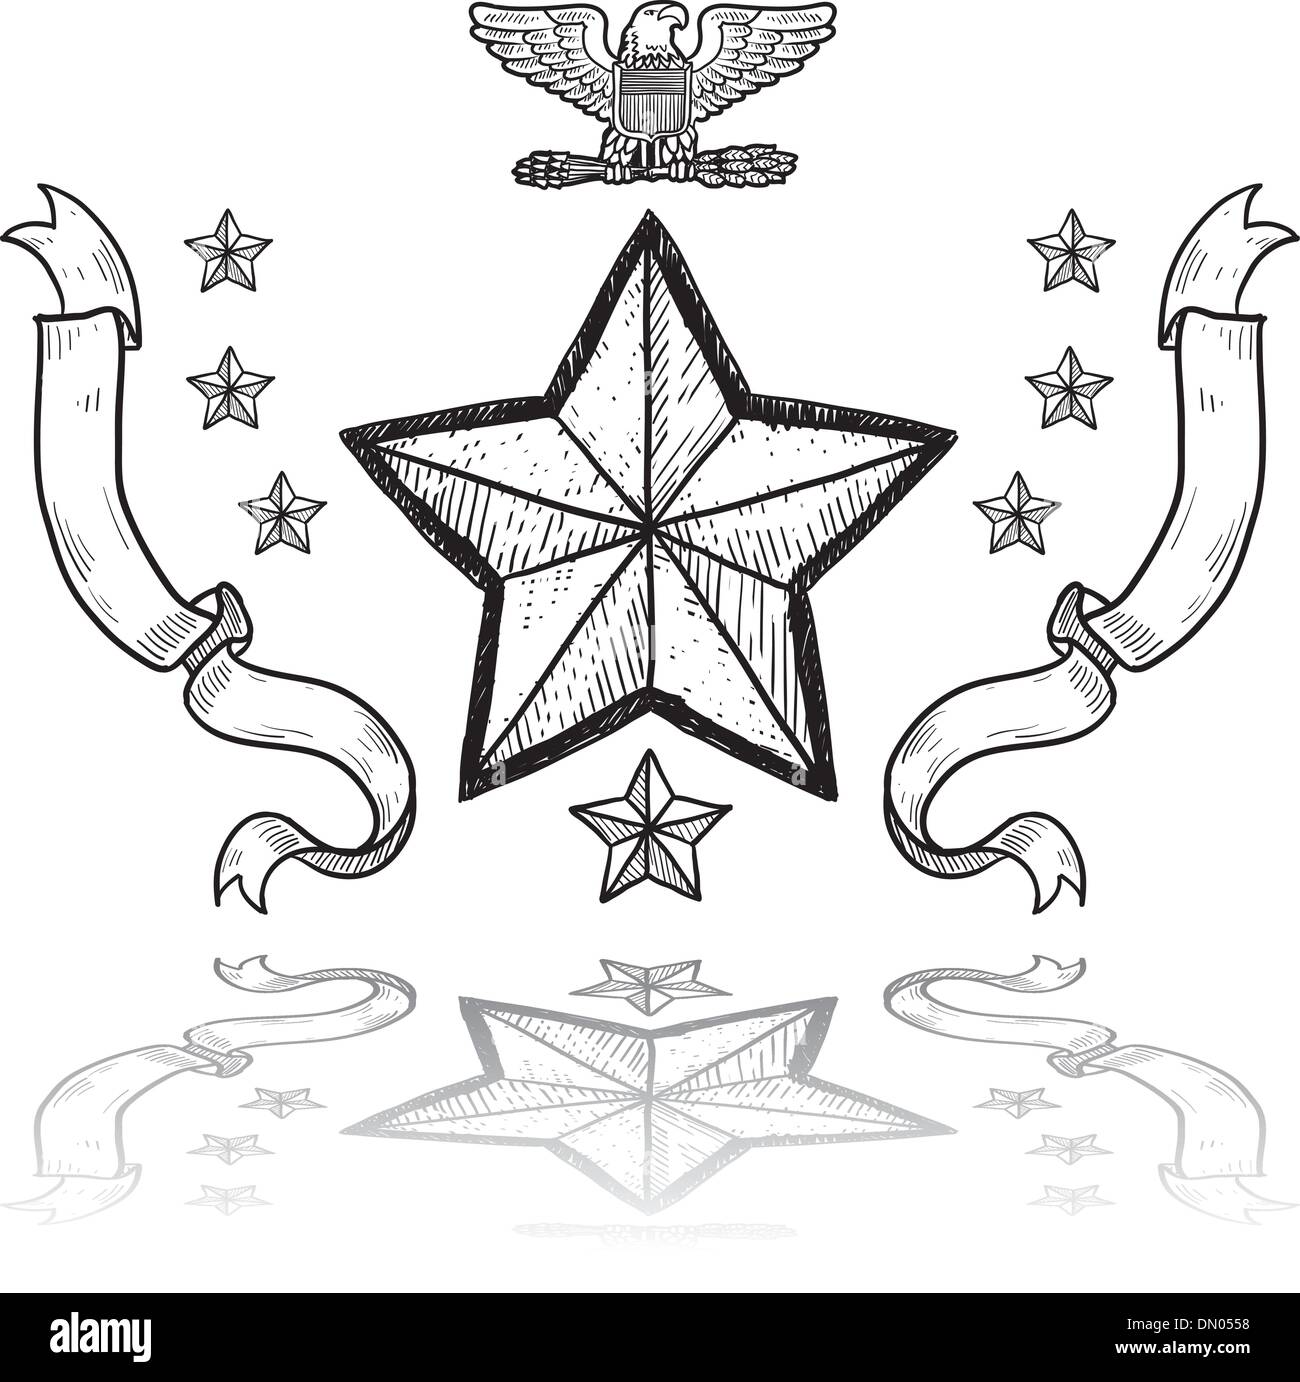 US Army military vector insignia Stock Vector